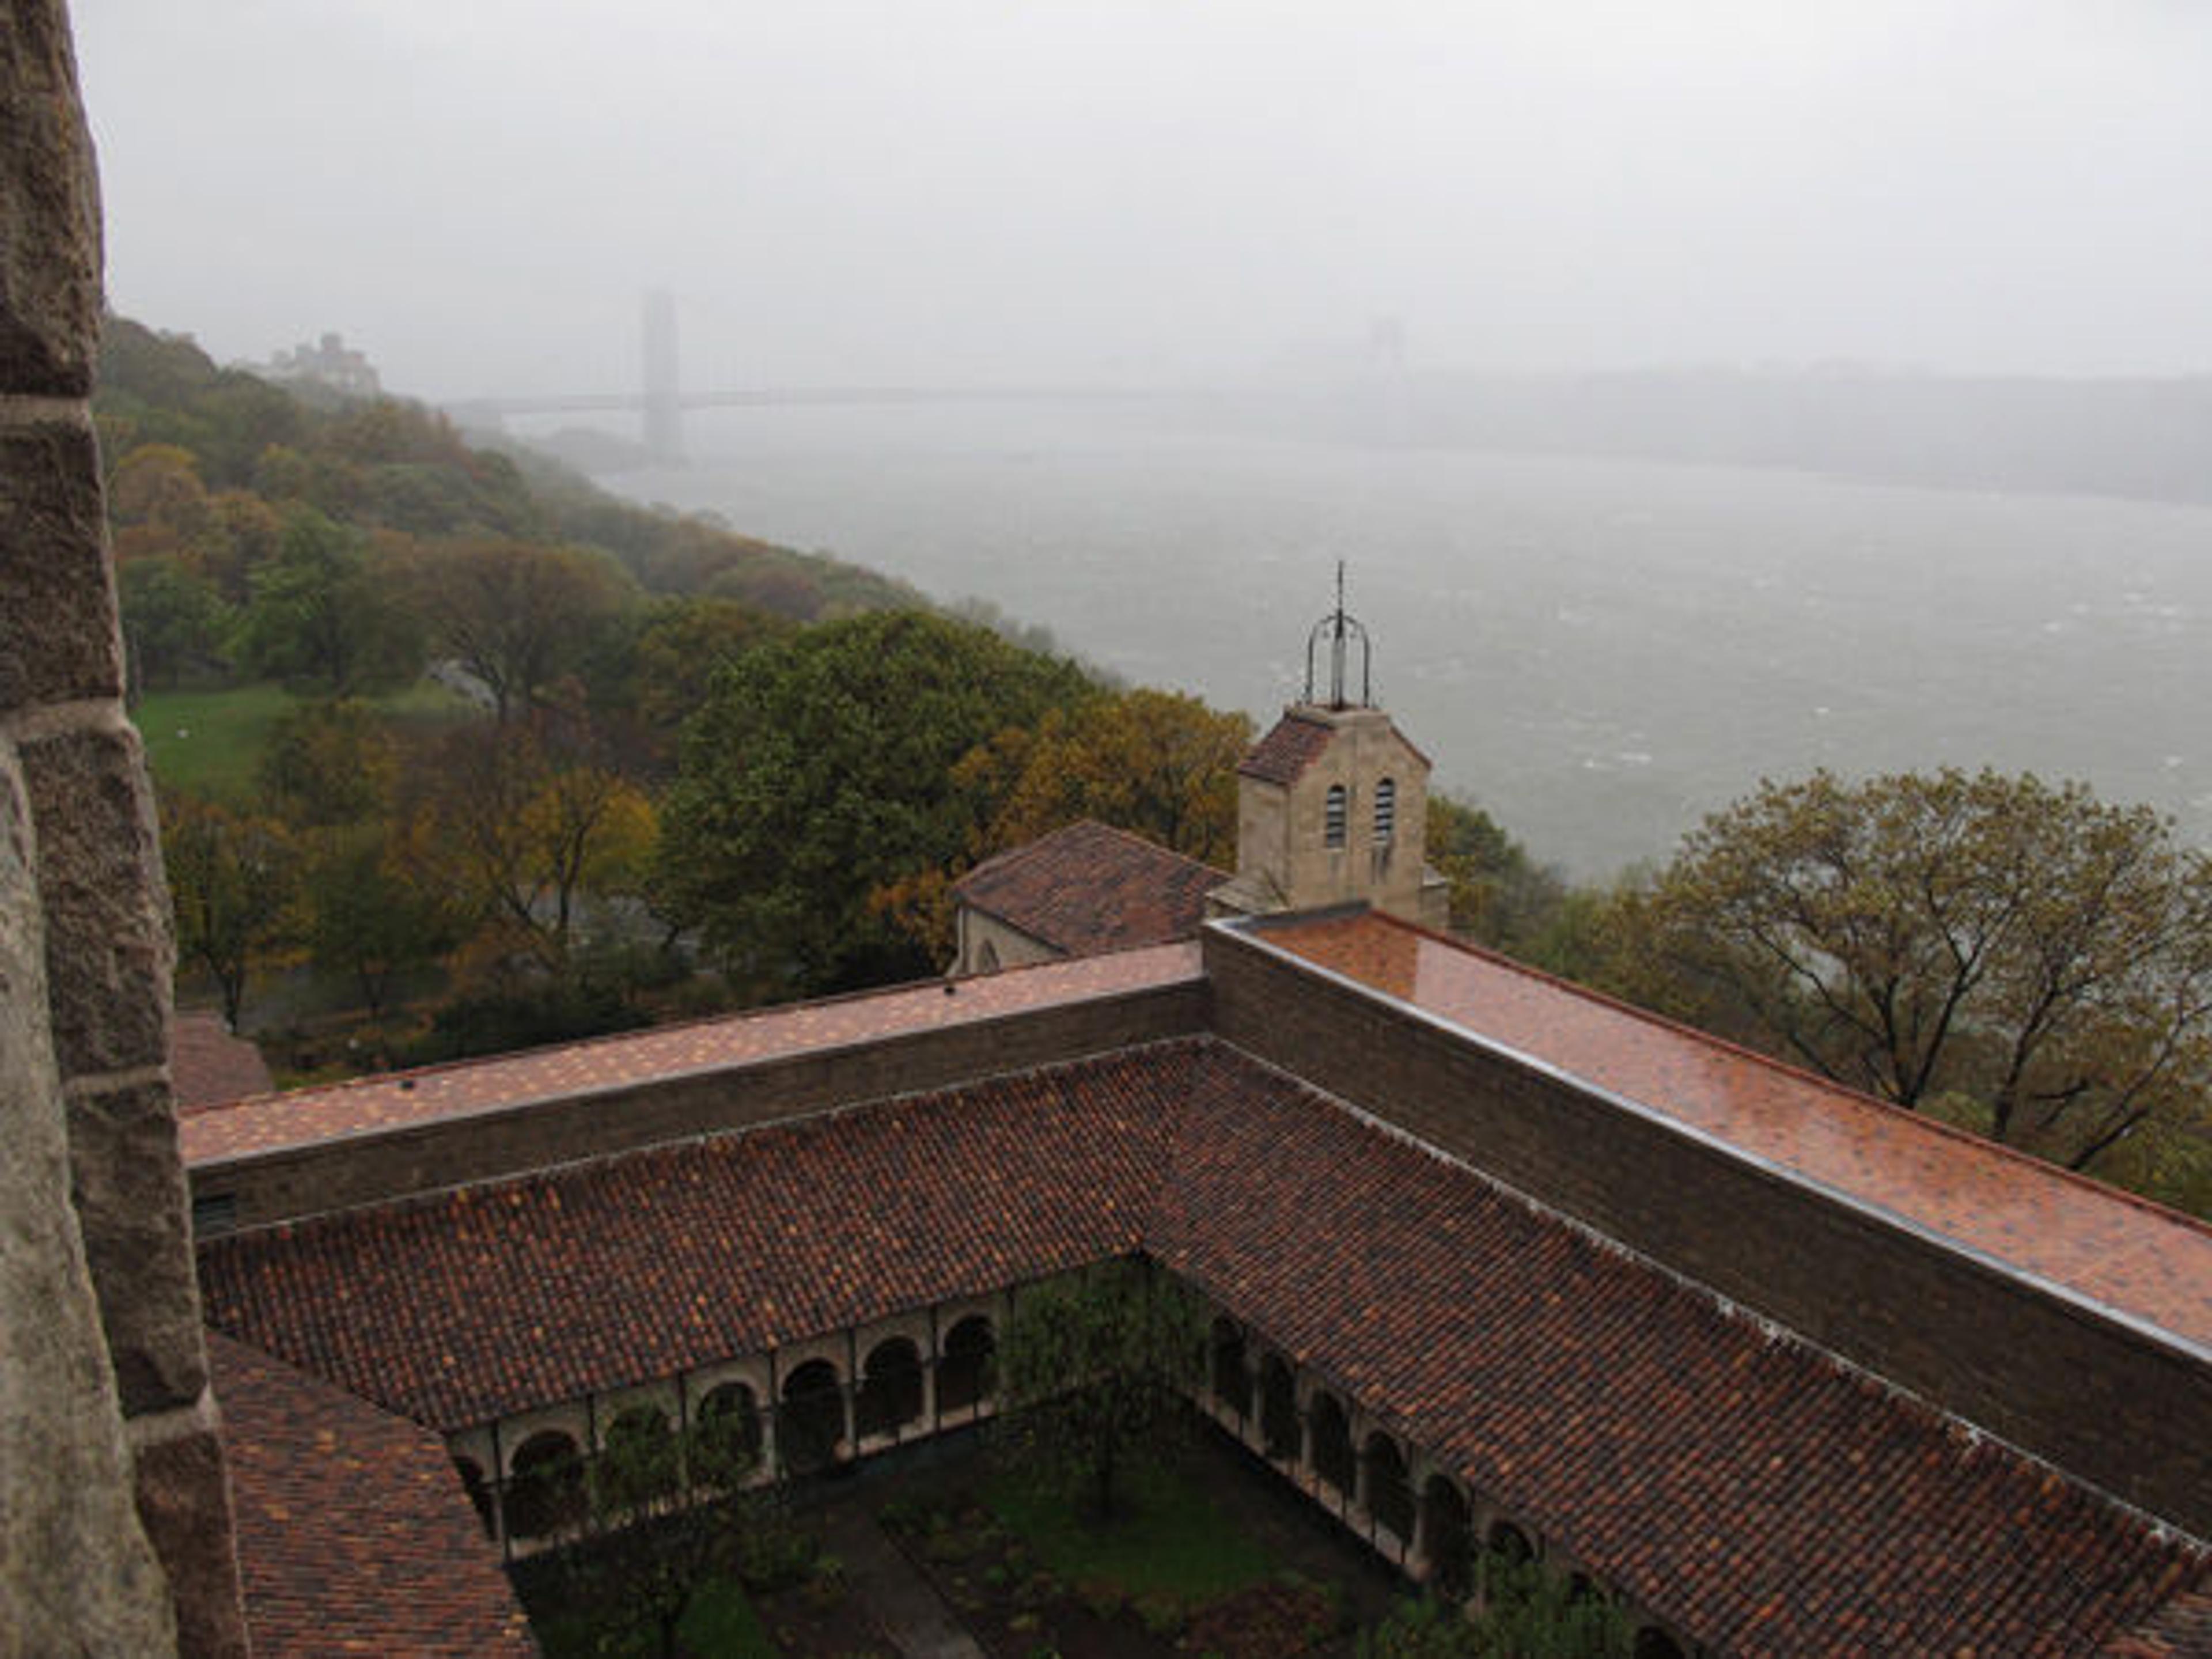 Superstorm Sandy as viewed from The Cloisters' tower